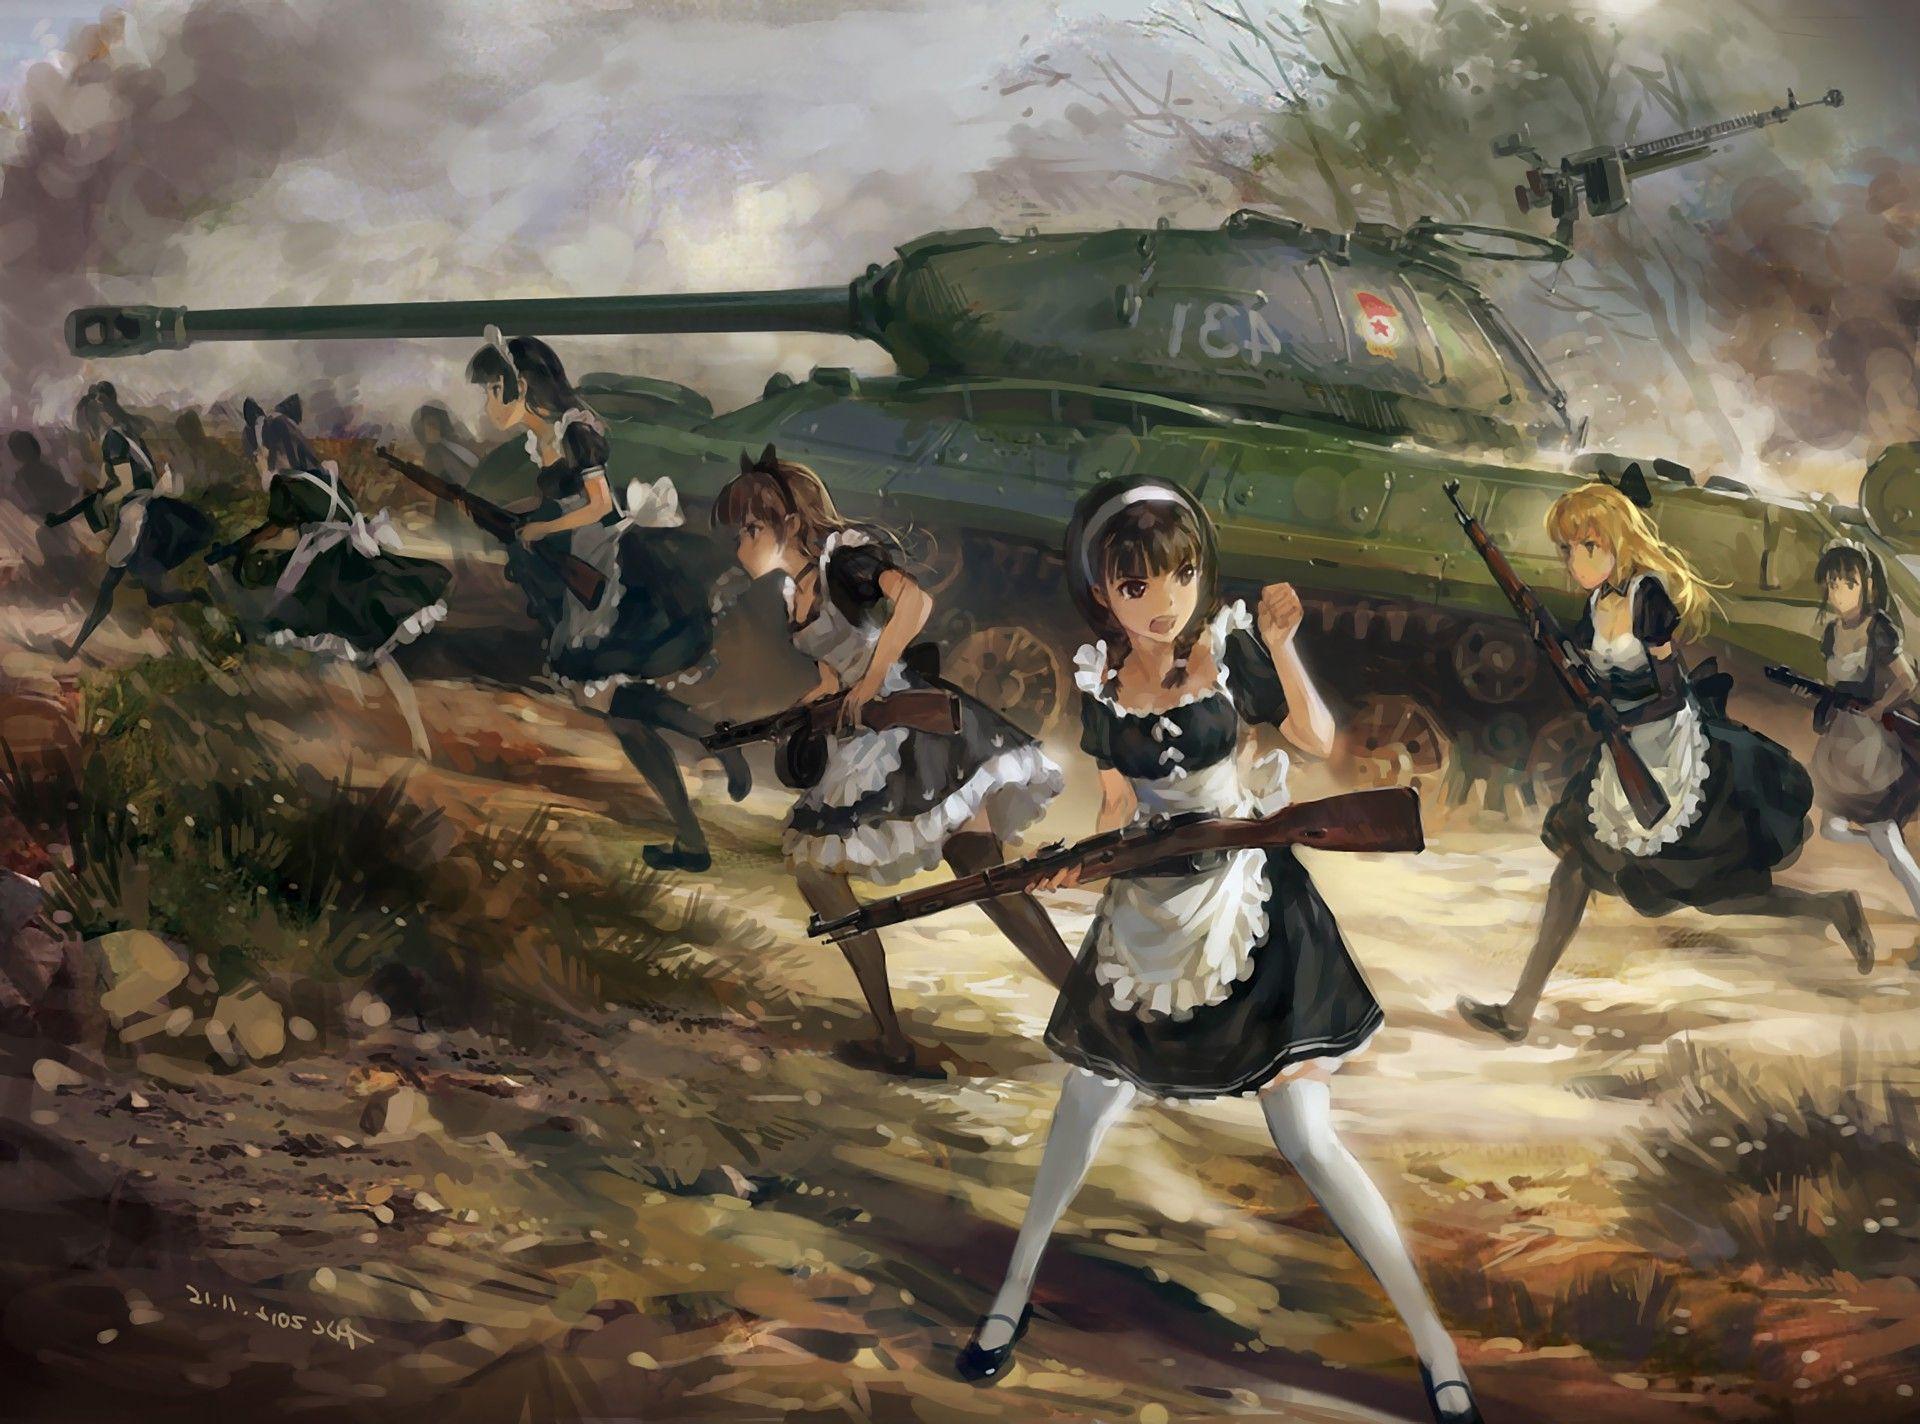 anime, Maid Outfit, War, Maid, Fantasy Art, IS French Maid